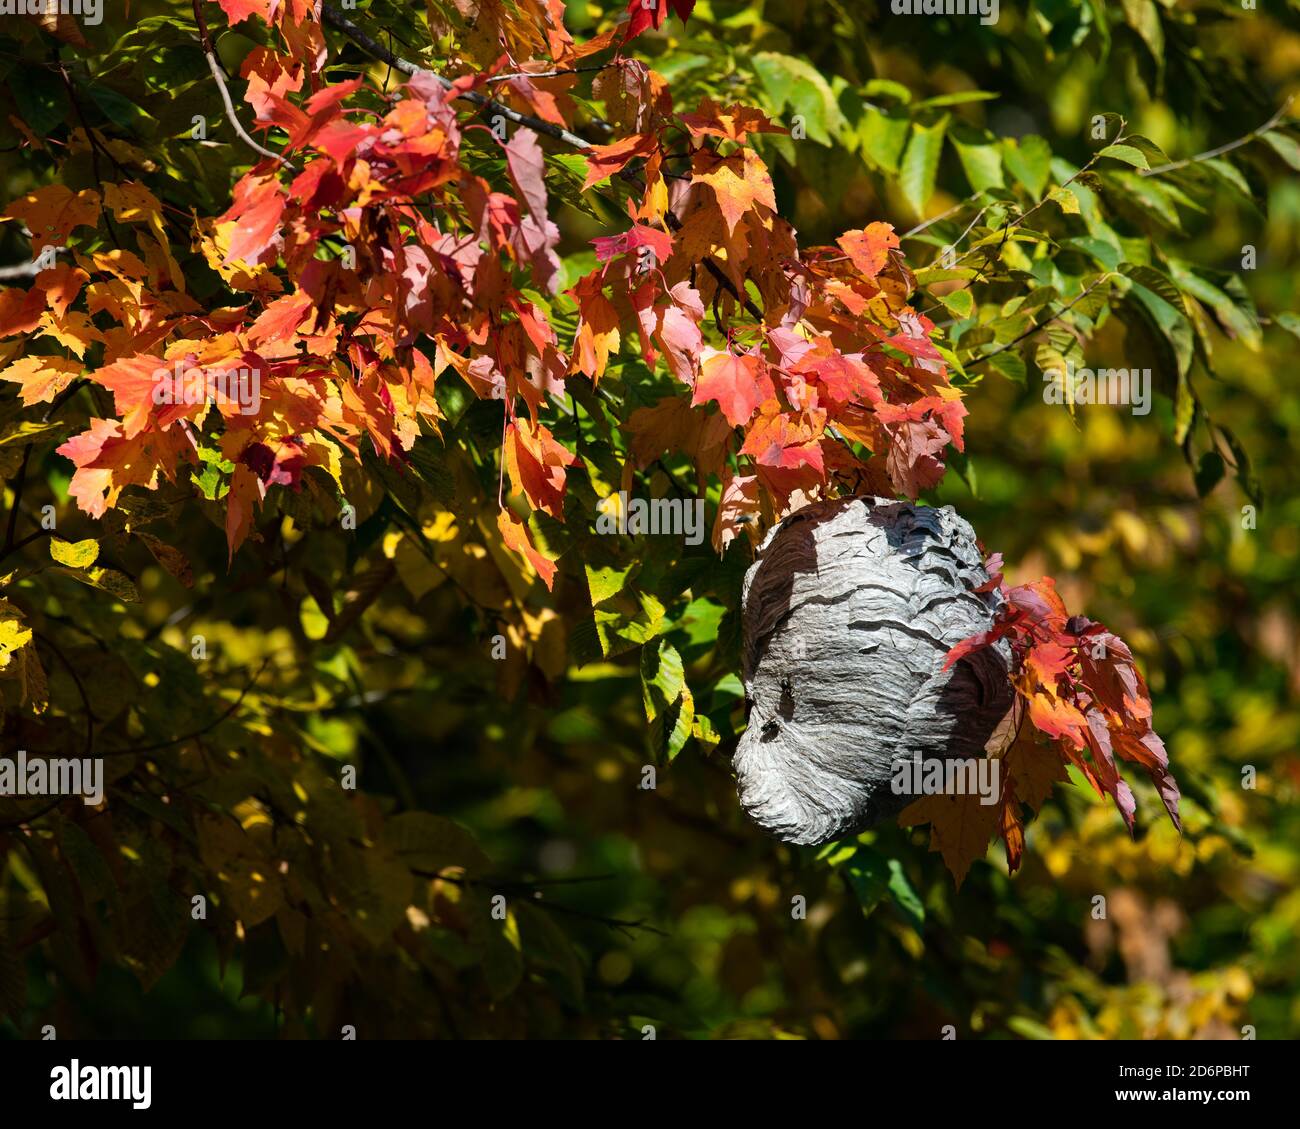 A hornet or wasp nest hanging in a colorful tree in the Adirondack wilderness in autumn. Stock Photo